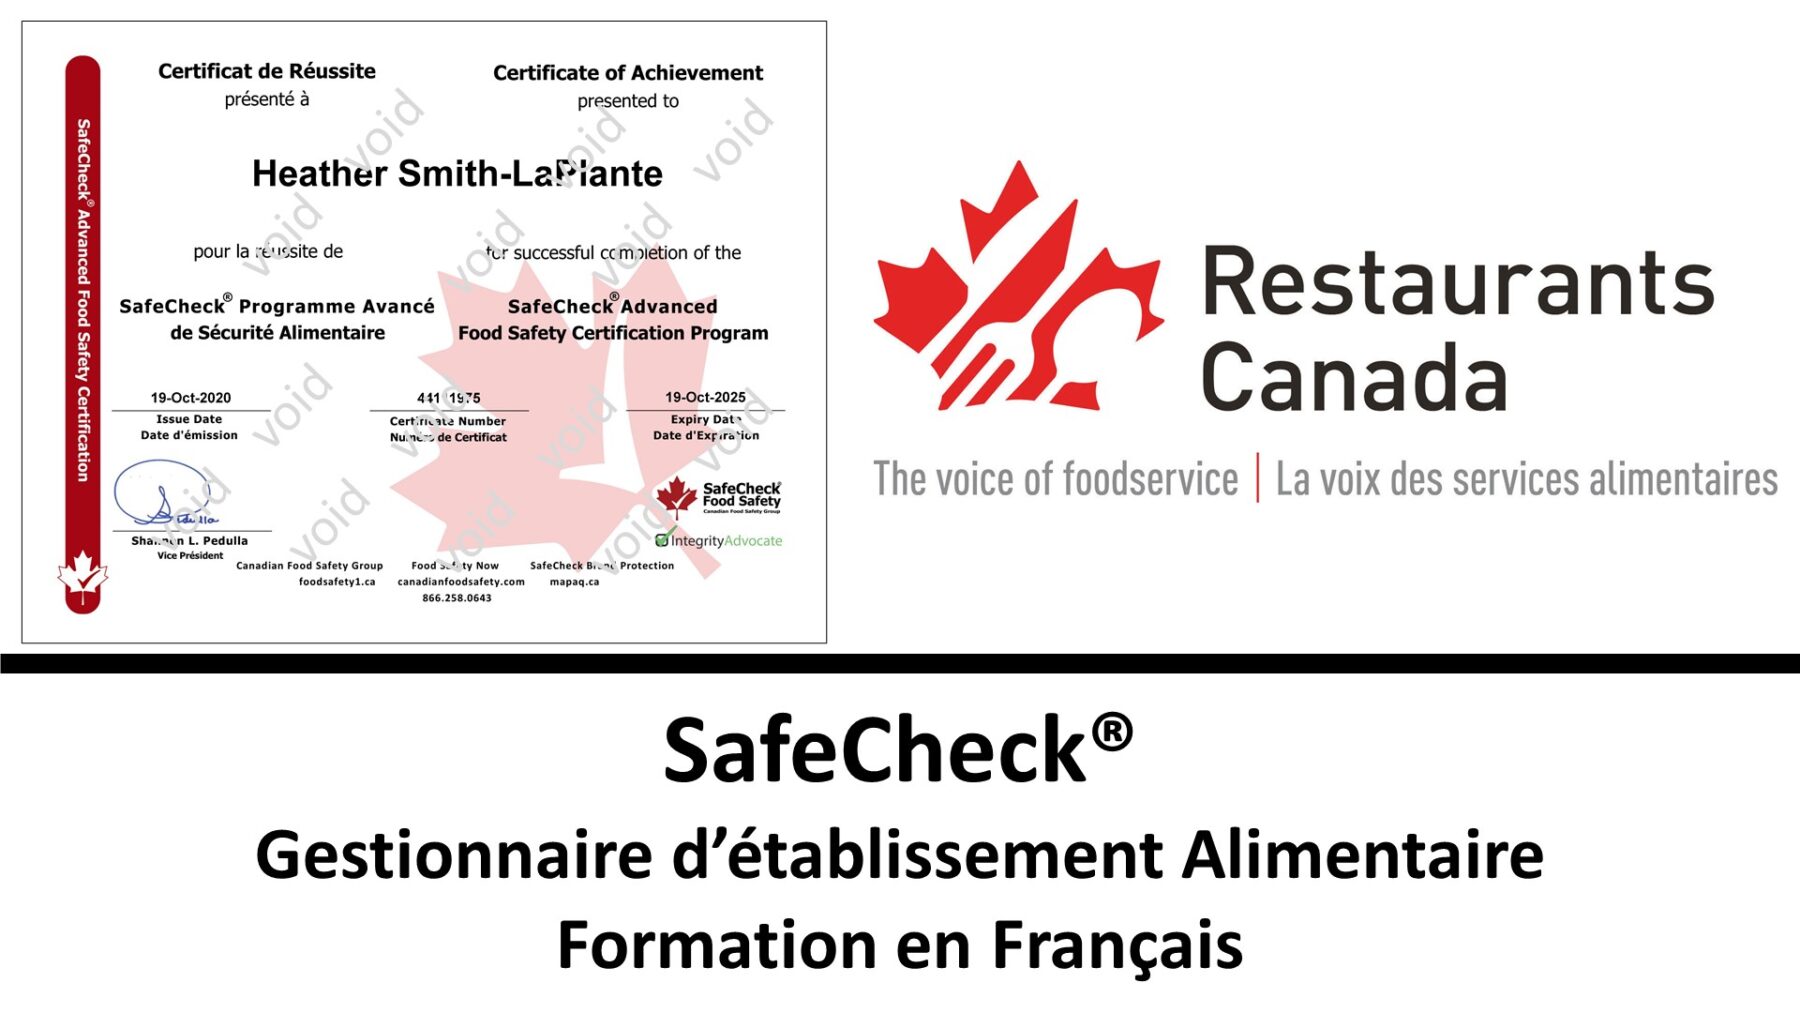 SafeCheck Food Safety Certification Course - French Language - Restaurants Canada